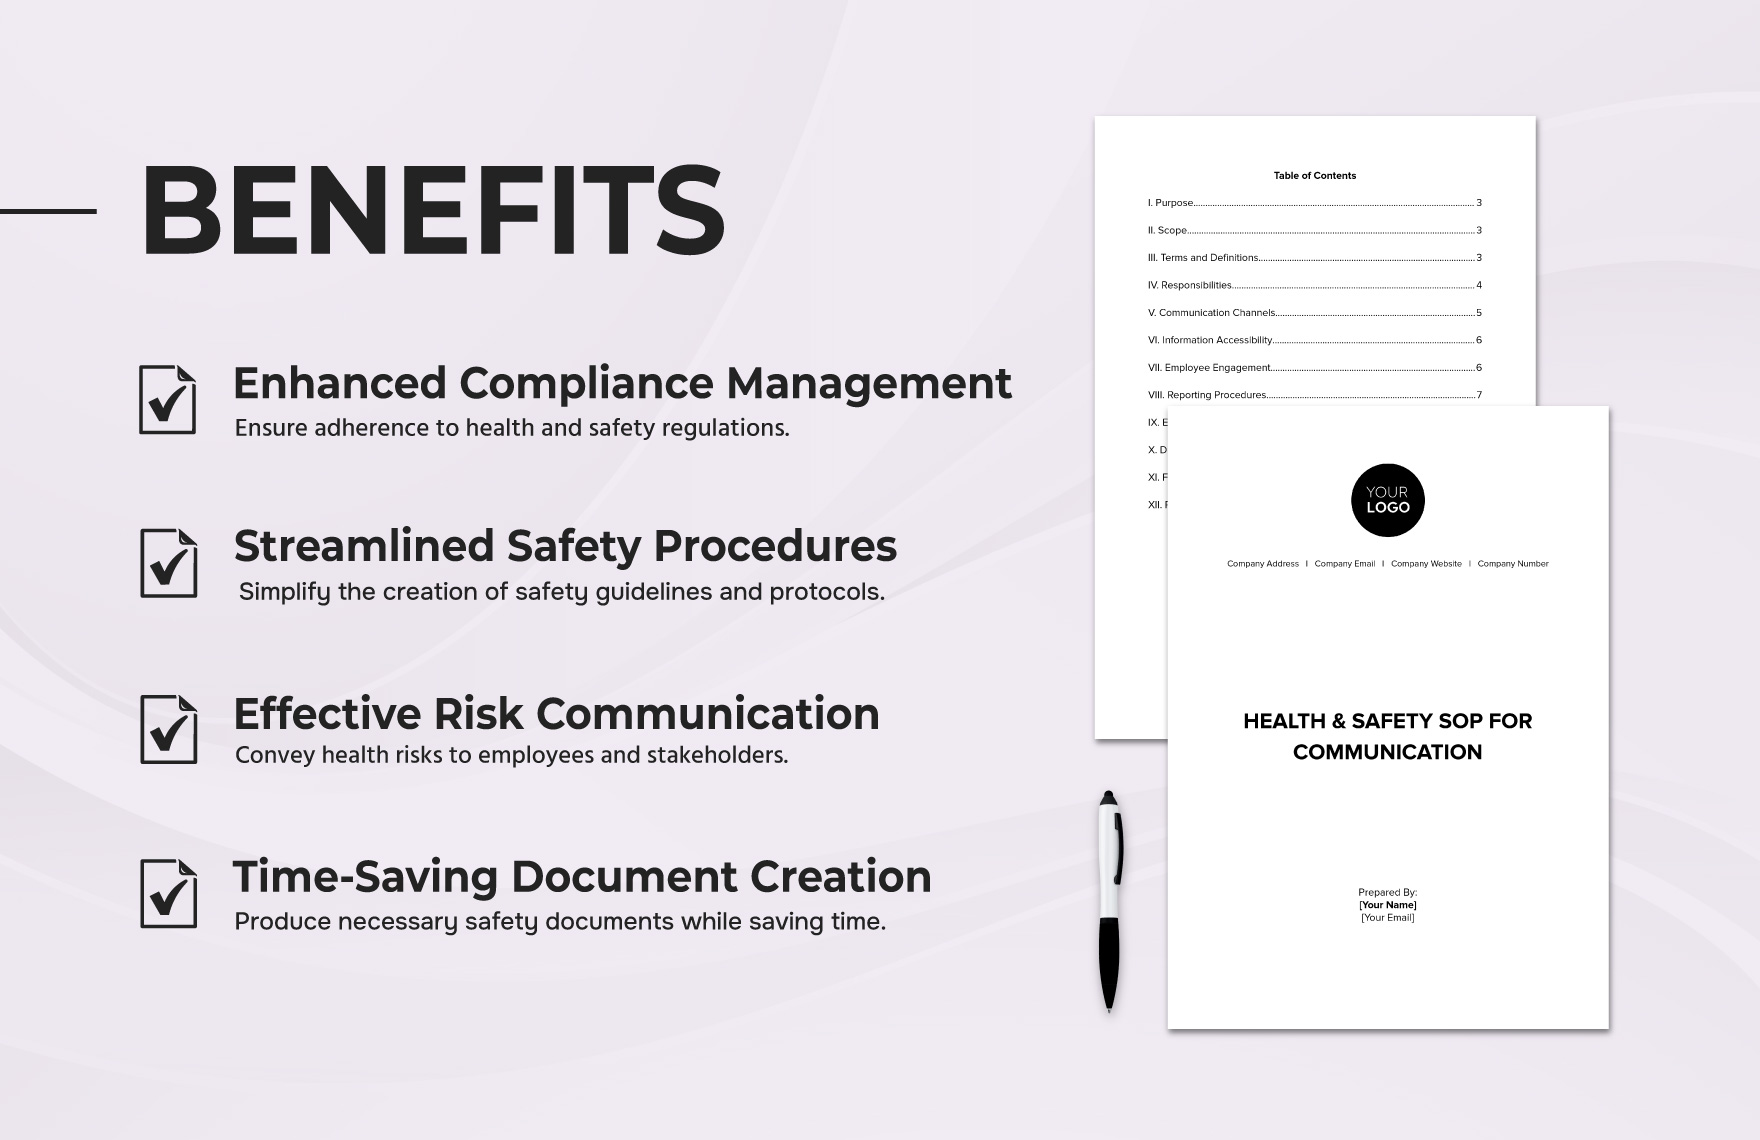 Health & Safety SOP for Communication Template